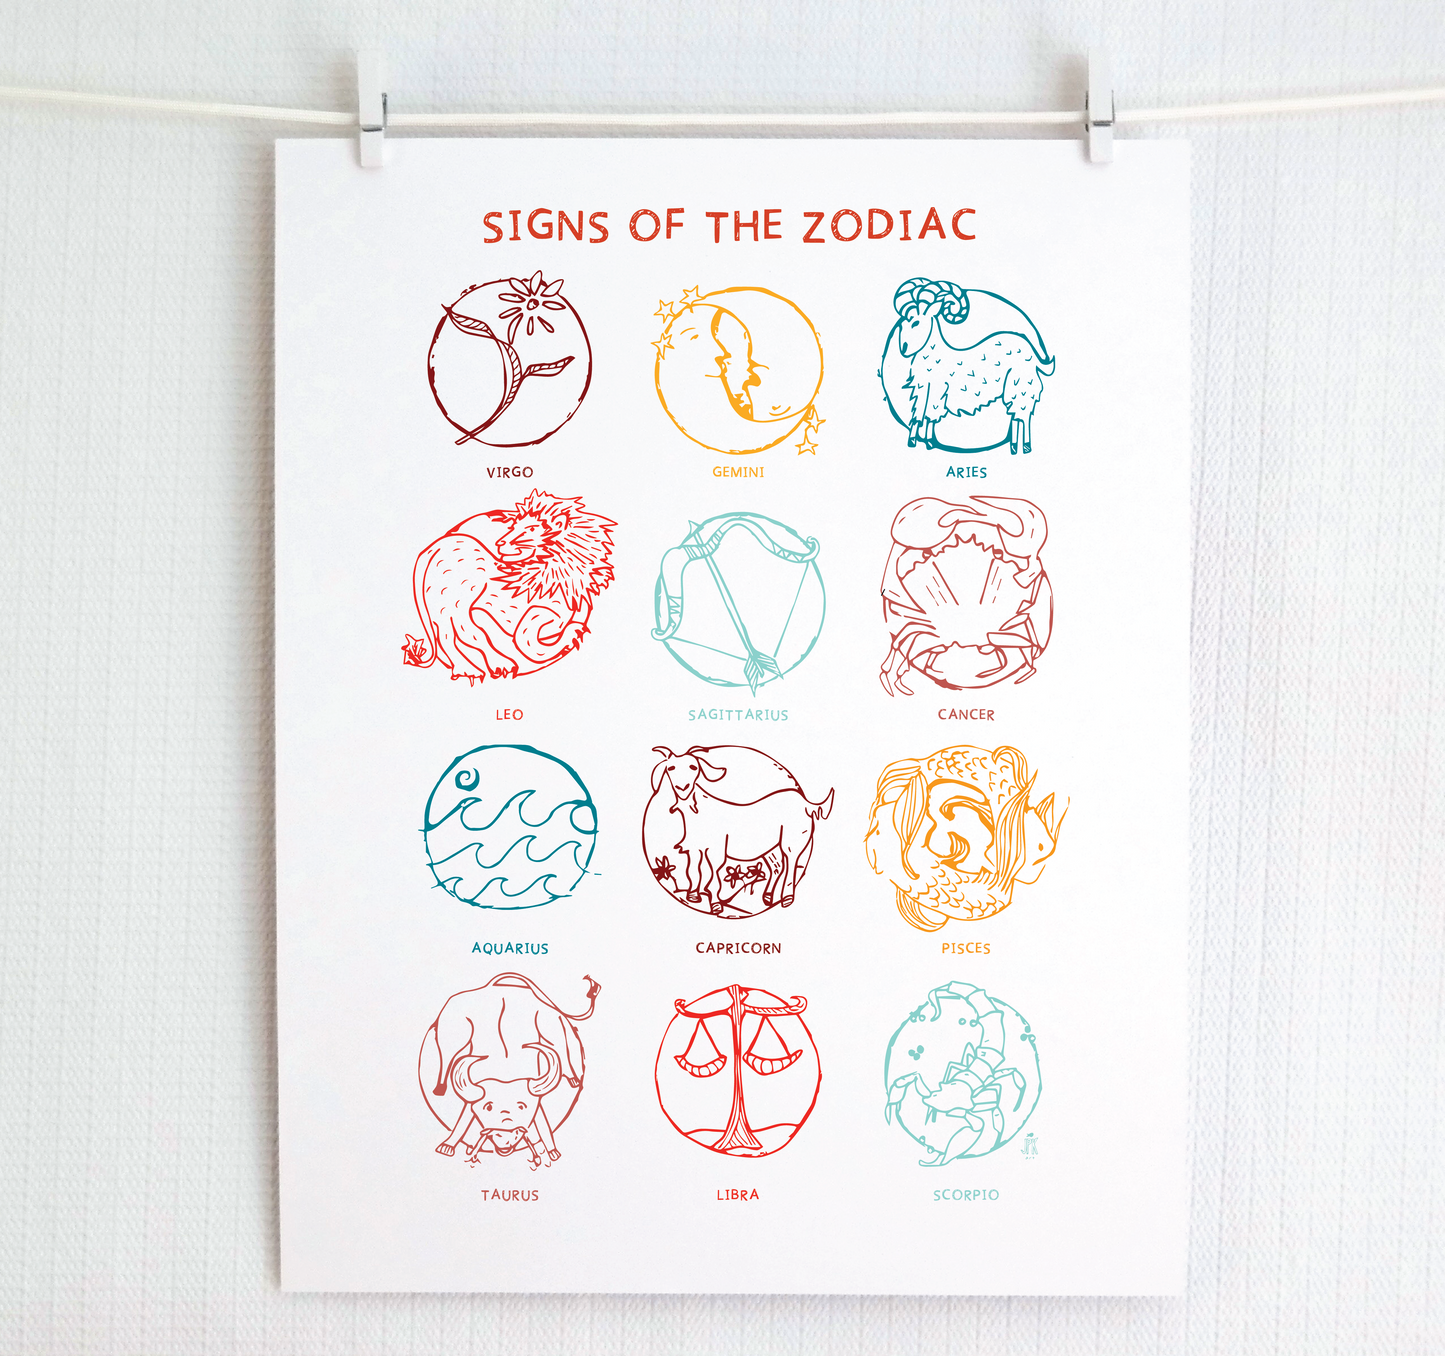 Signs of the Zodiac (color)